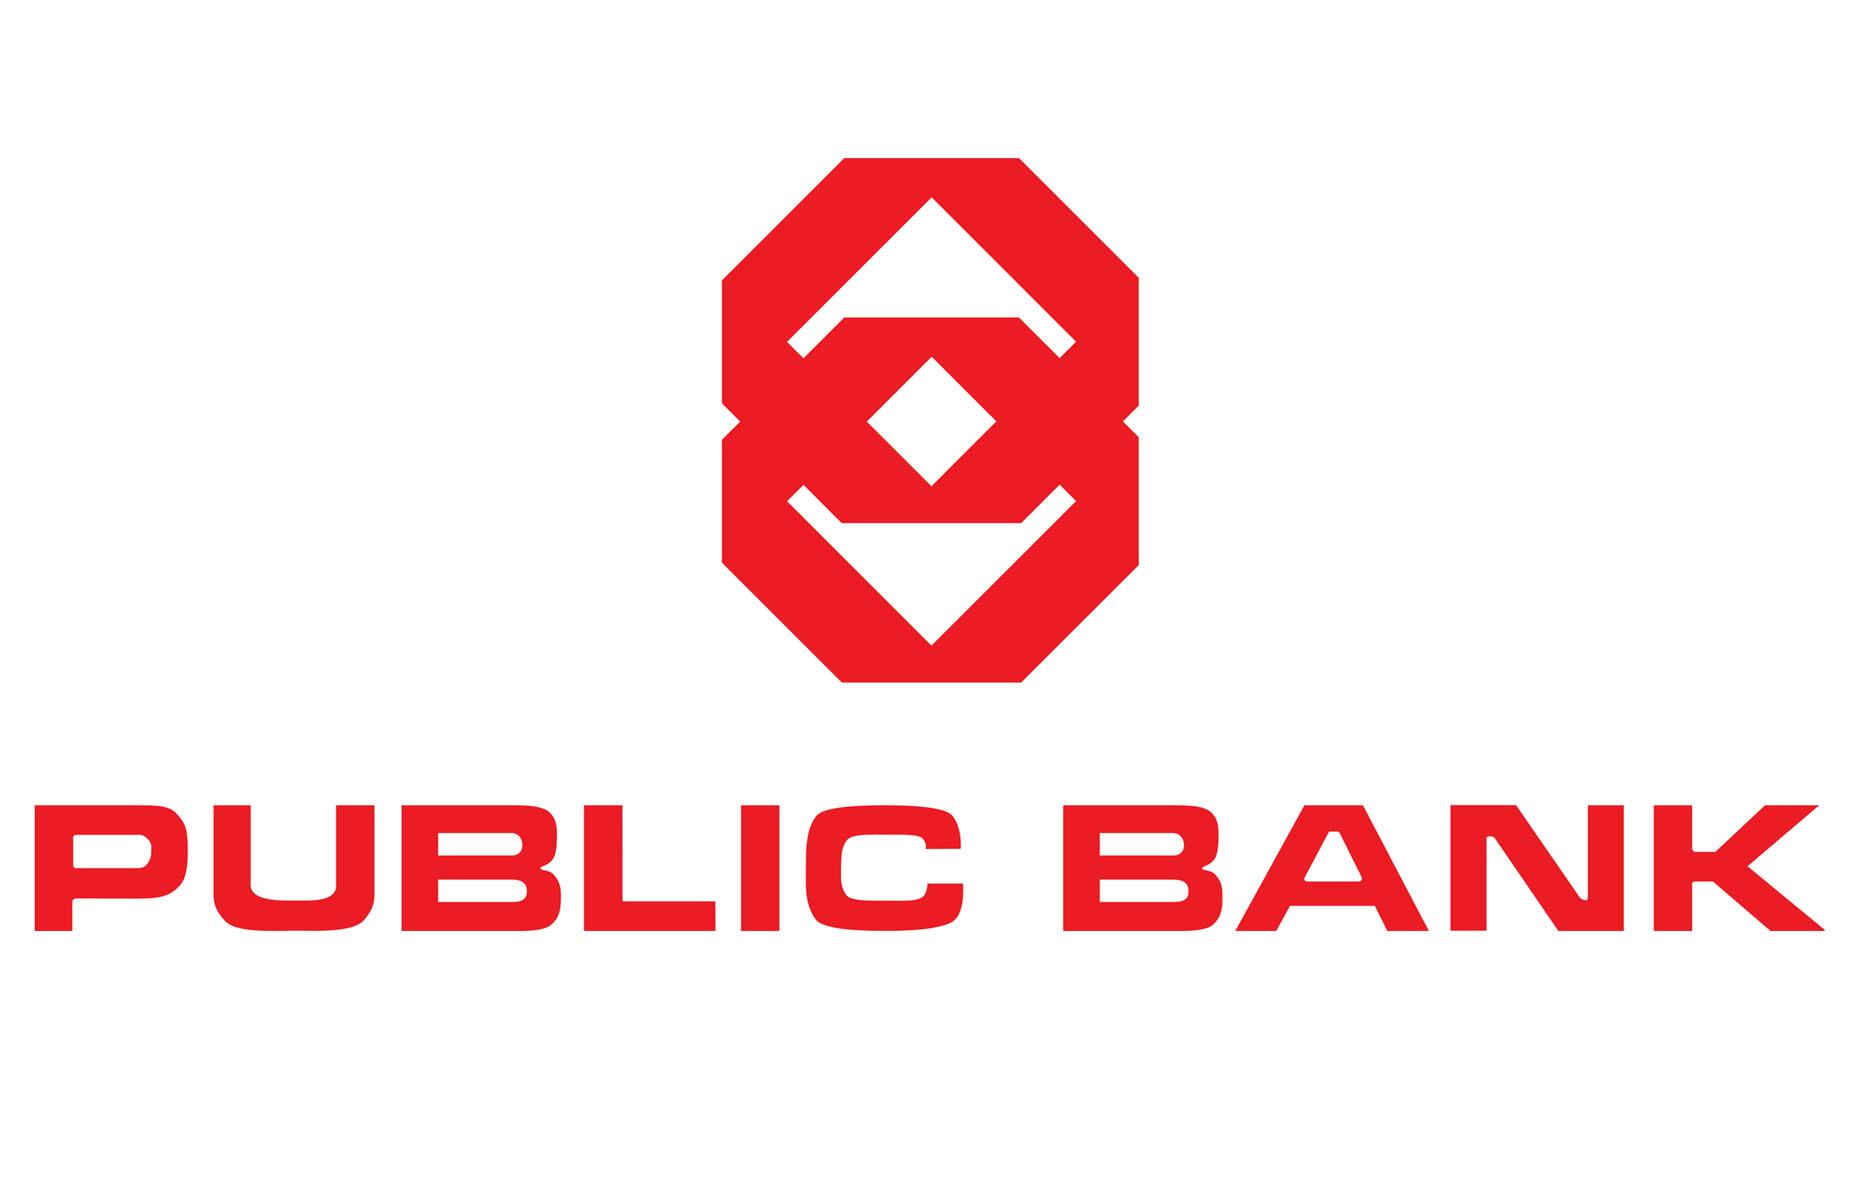 1967 – Public Bank Berhad: $1,000 invested then is worth $336,000 (£230k) today + dividends